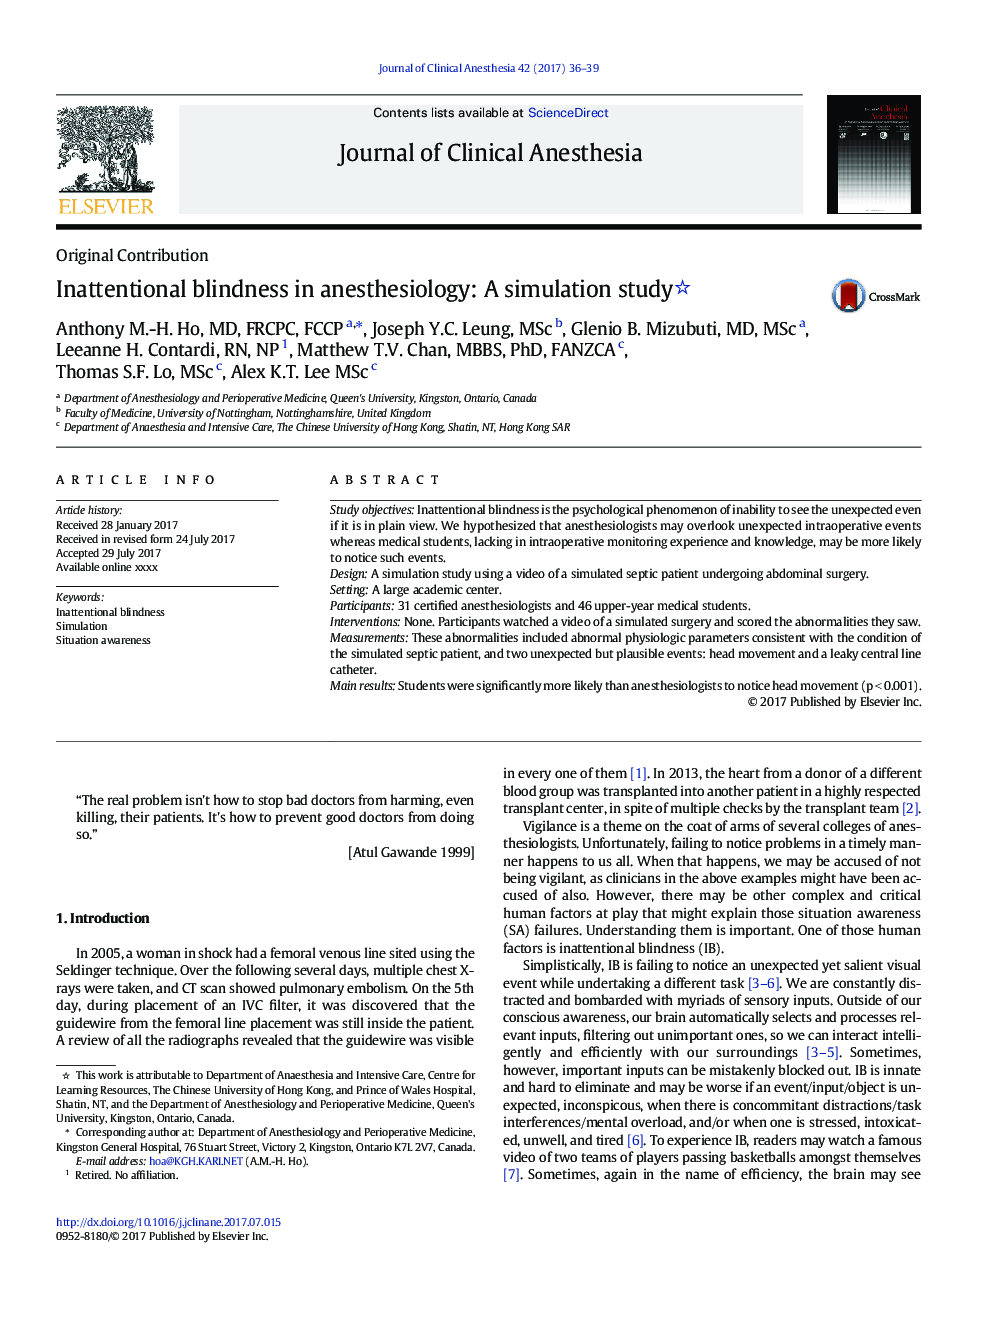 Inattentional blindness in anesthesiology: A simulation study